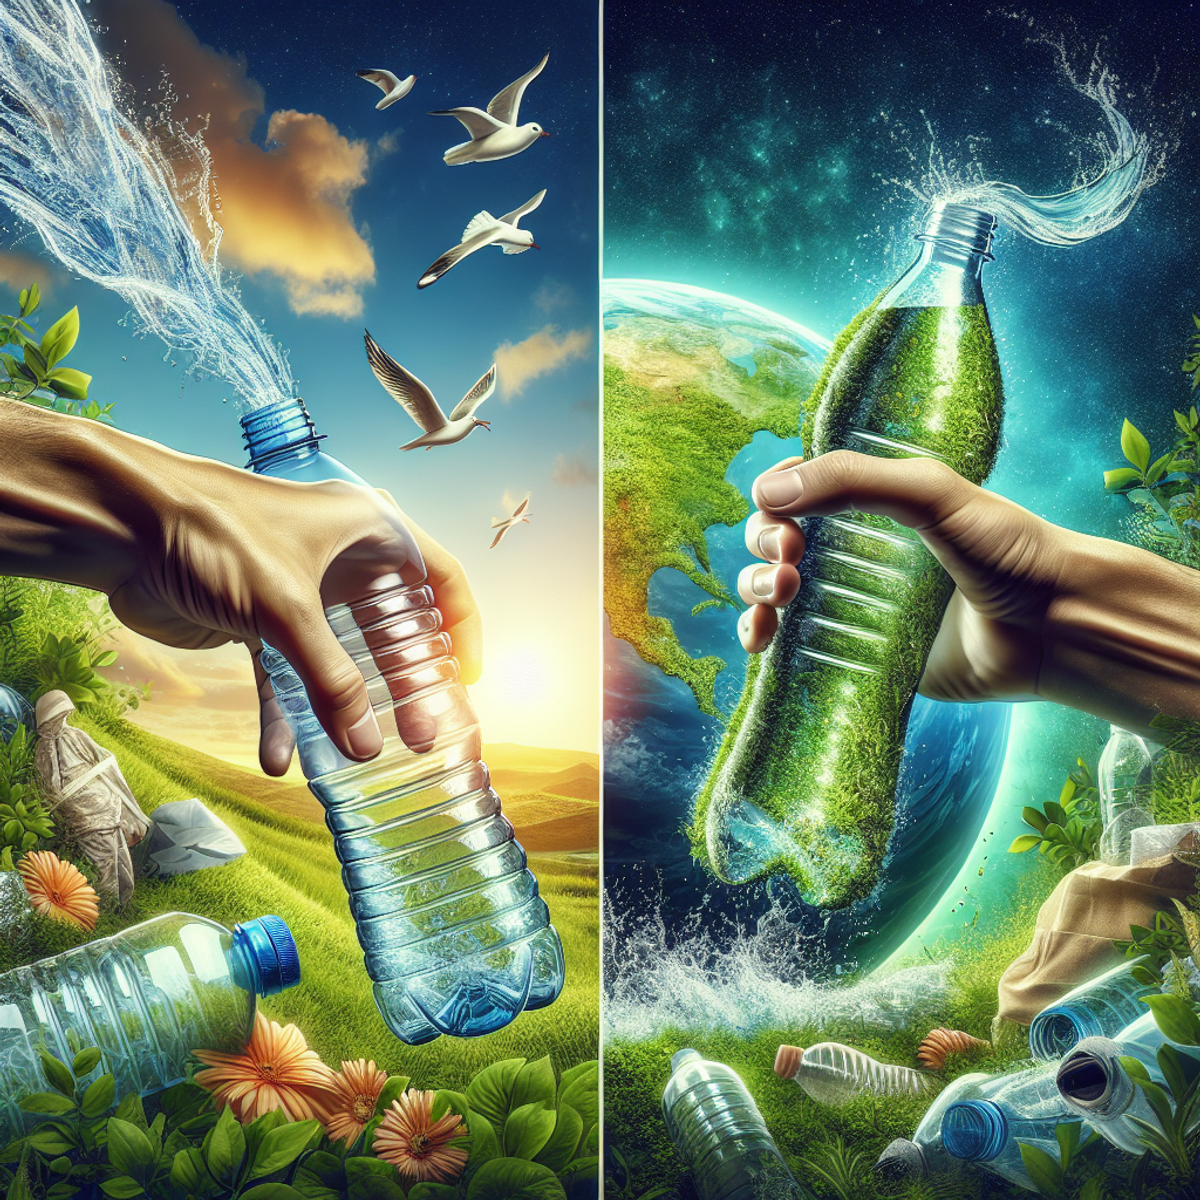 A hand is seen placing a plastic bottle on the left side, while on the right side the same hand is holding up a gleaming glass bottle. In the backgrou